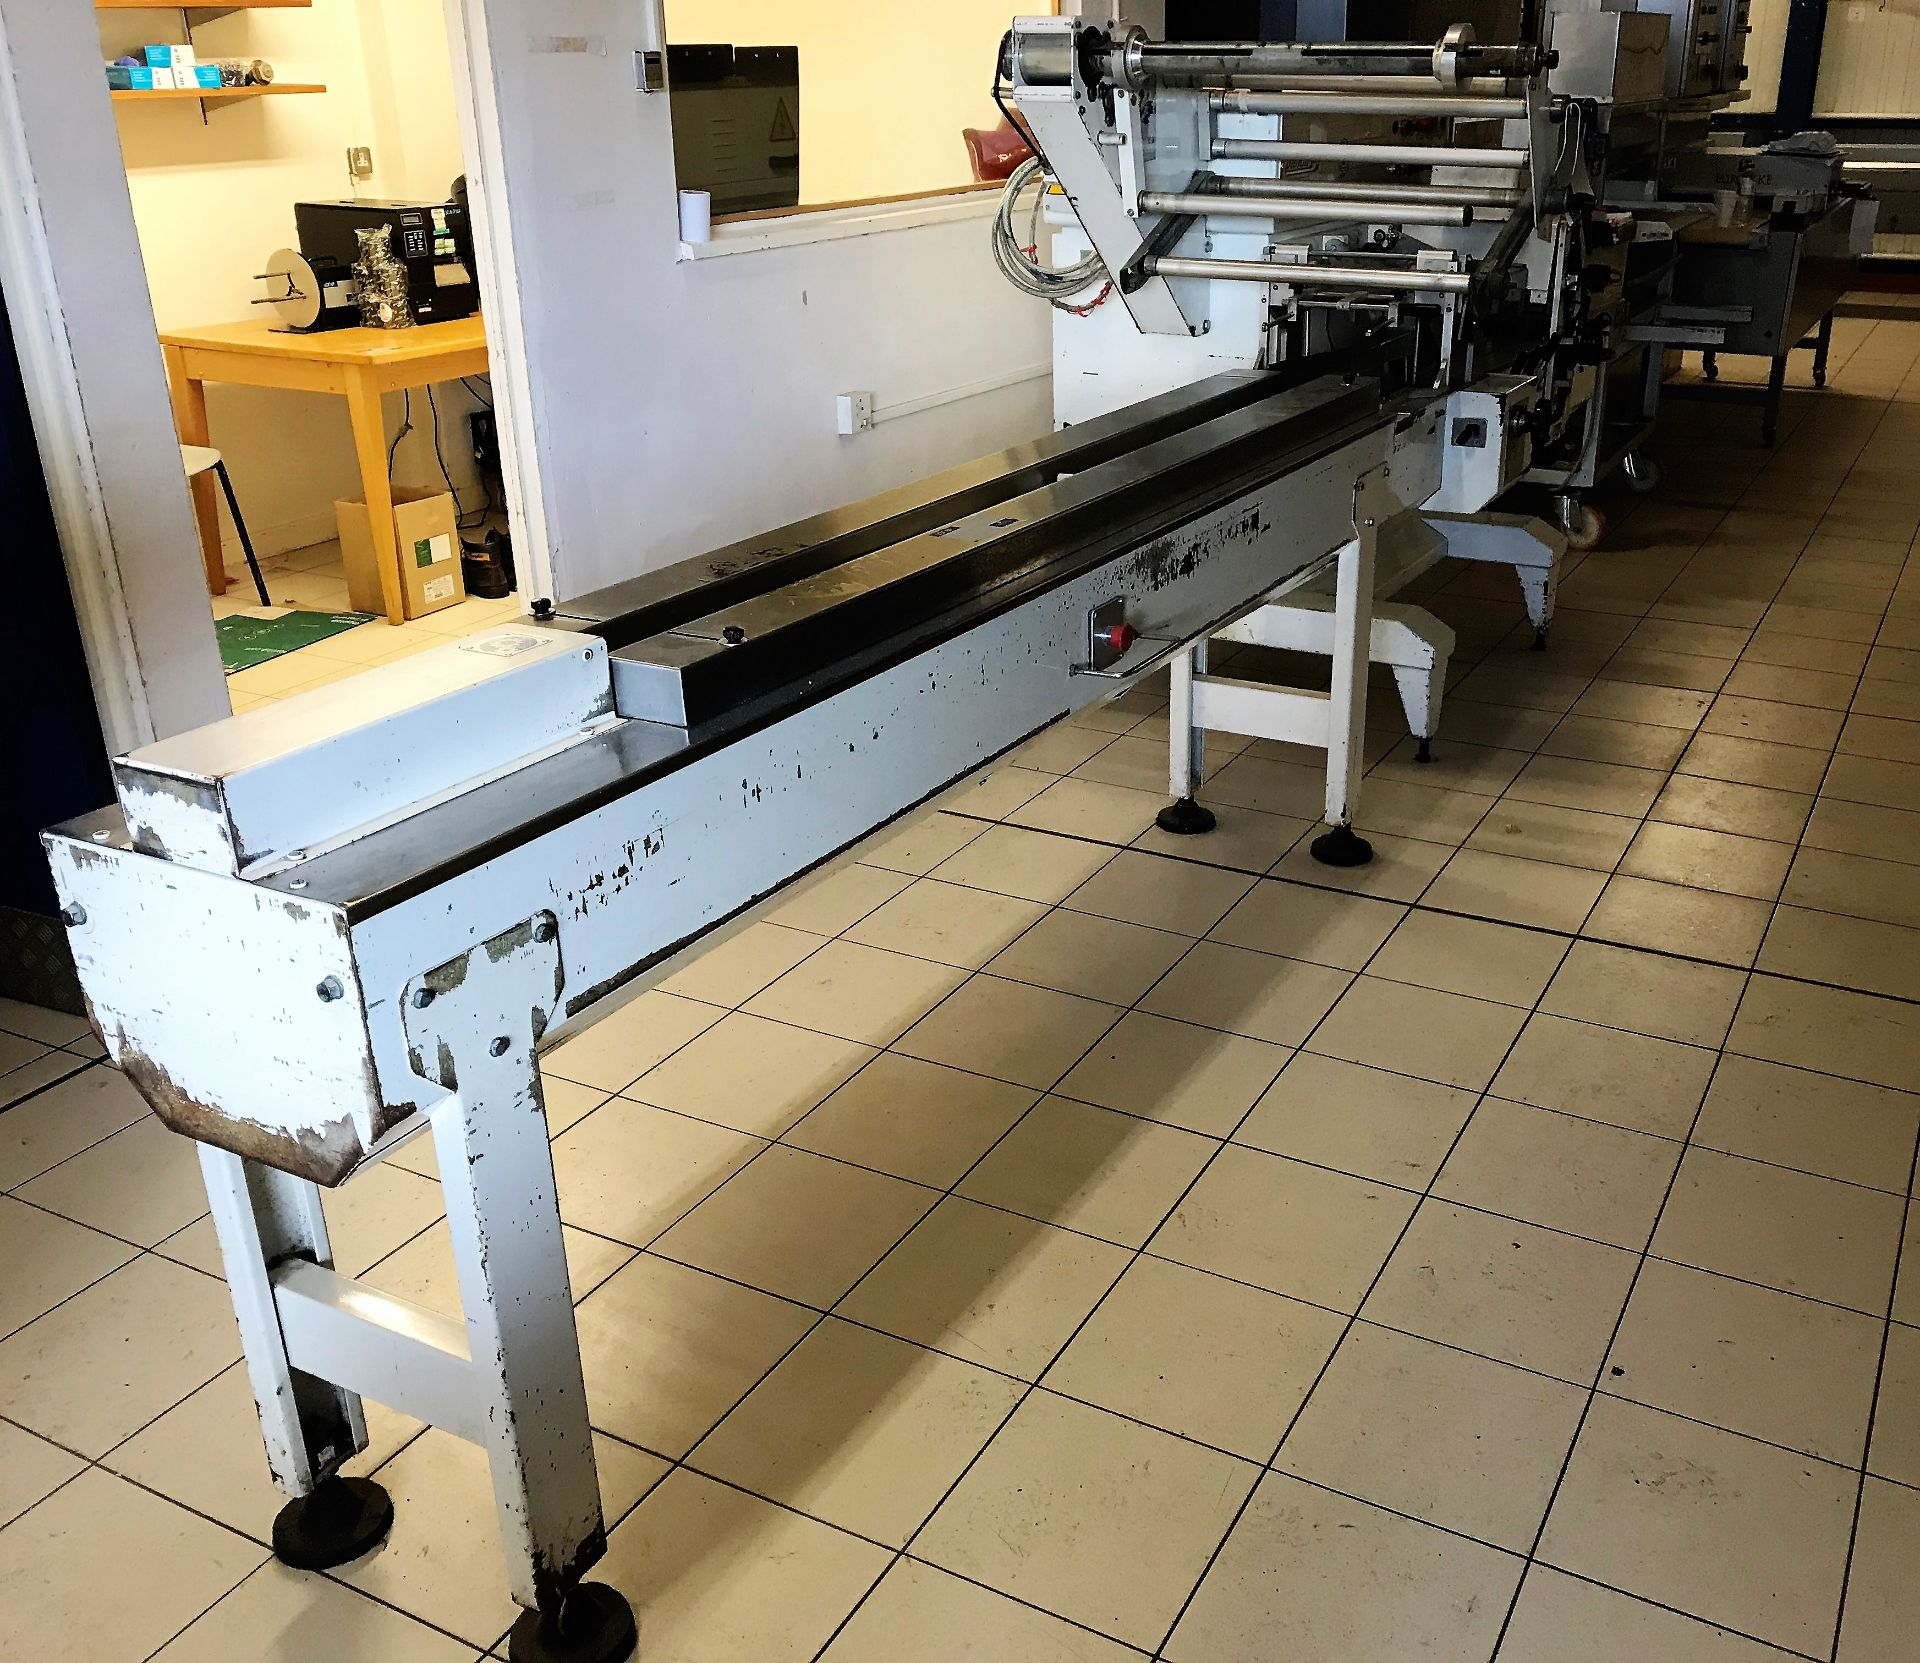 A Record Panda 1000 Flow Wrapping Machine No.03-95-097 (1996), 3ph-plug in; infeed 200mm x 850mm, - Image 2 of 8